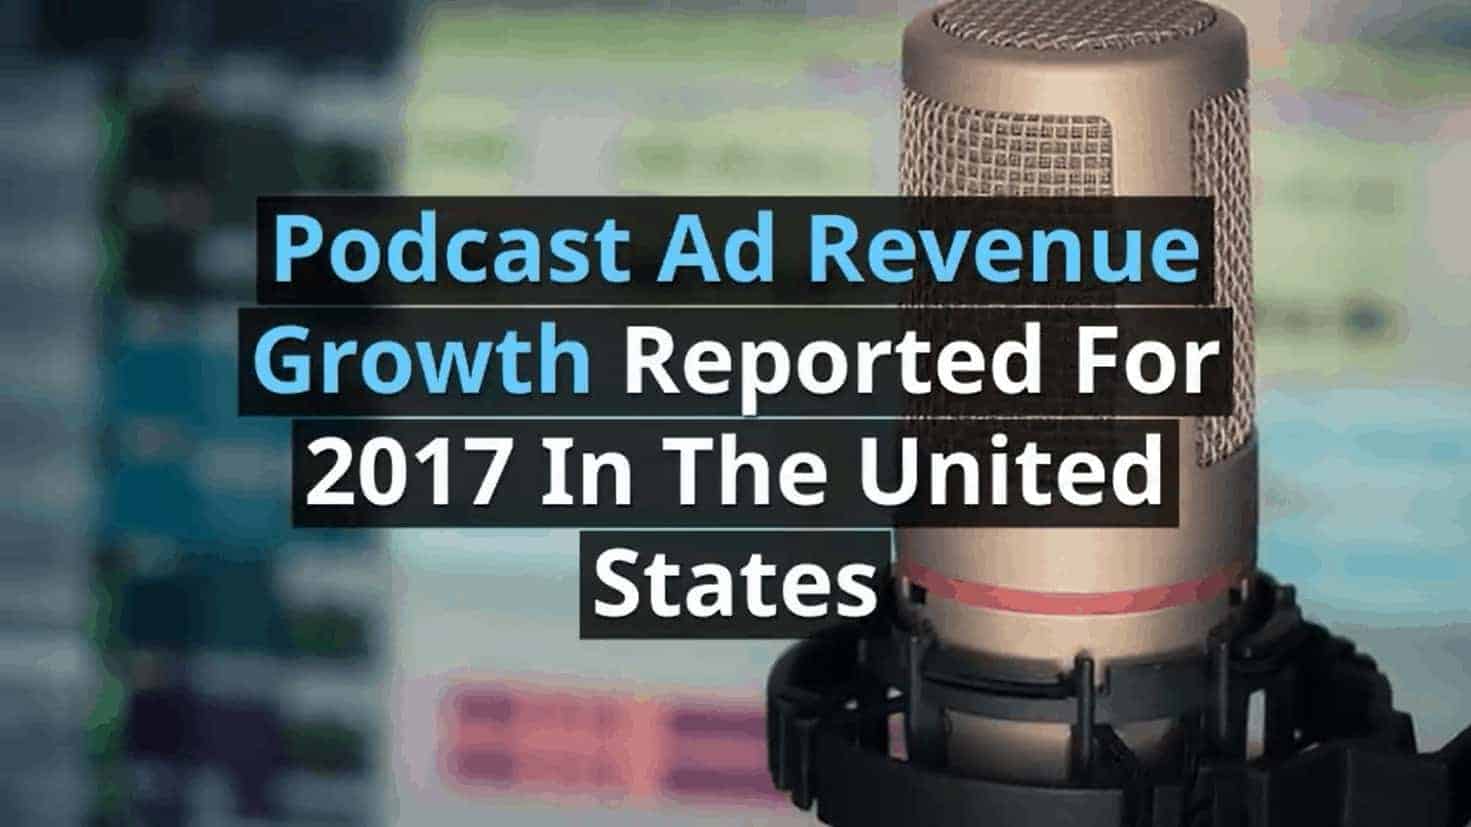 Podcast Ad Revenue Growth Reported For 2017 In The United States